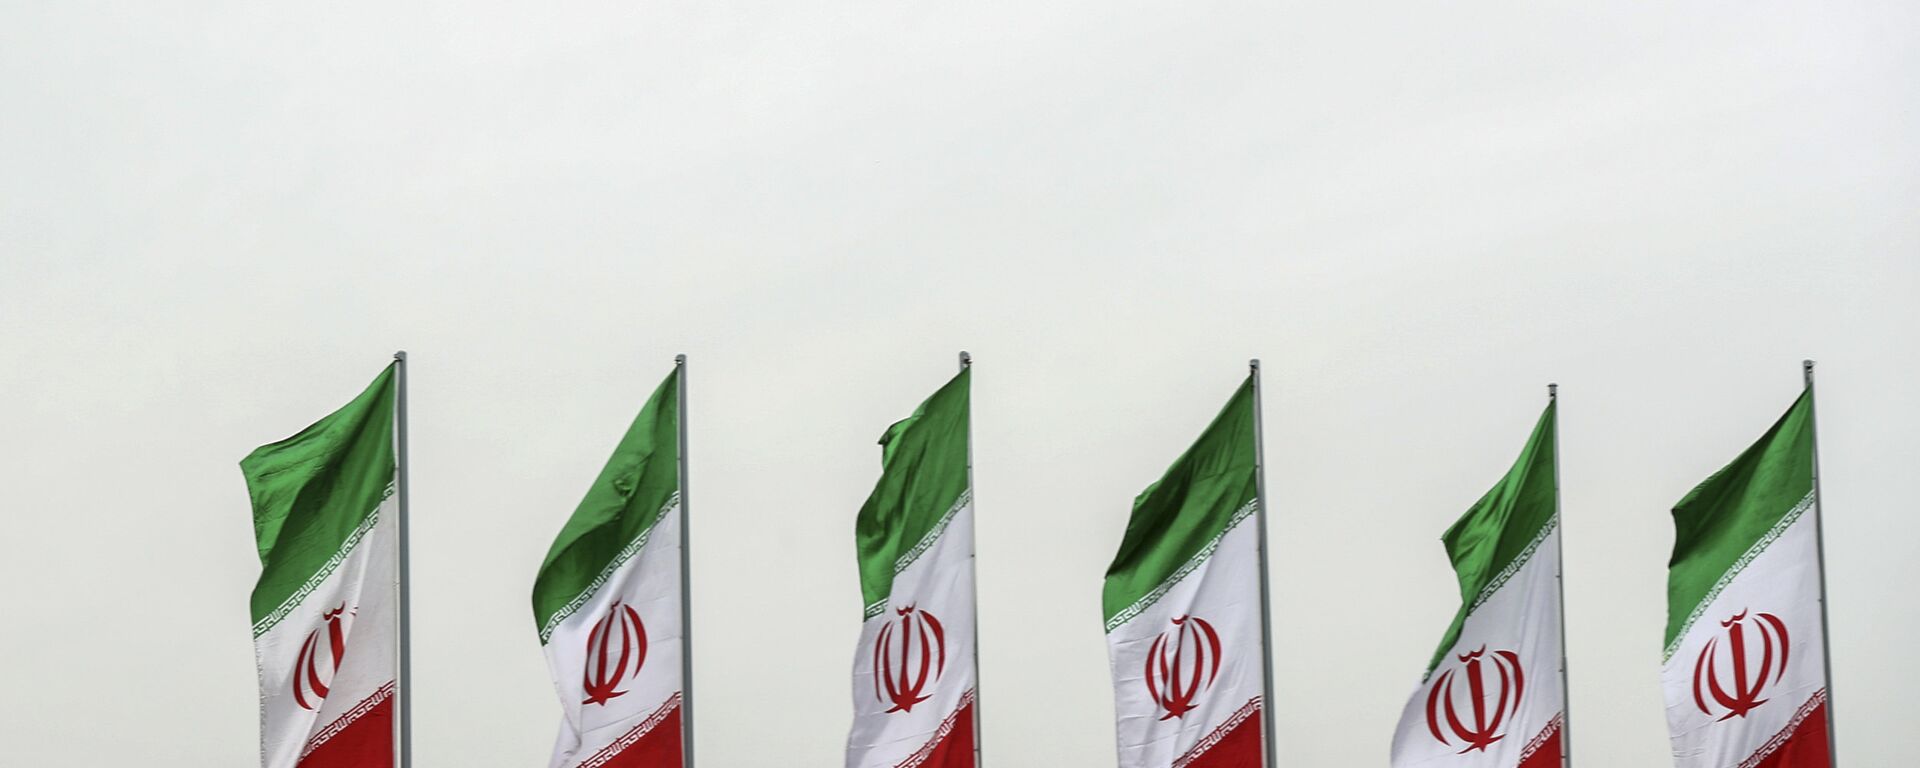 In this photo released by the official website of the office of the Iranian Presidency, a fighter jet flies over Iranian flags during the army parade commemorating National Army Day in front of the shrine of the late revolutionary founder Ayatollah Khomeini, just outside Tehran, Iran, Thursday, April 18, 2019 - Sputnik International, 1920, 12.12.2022